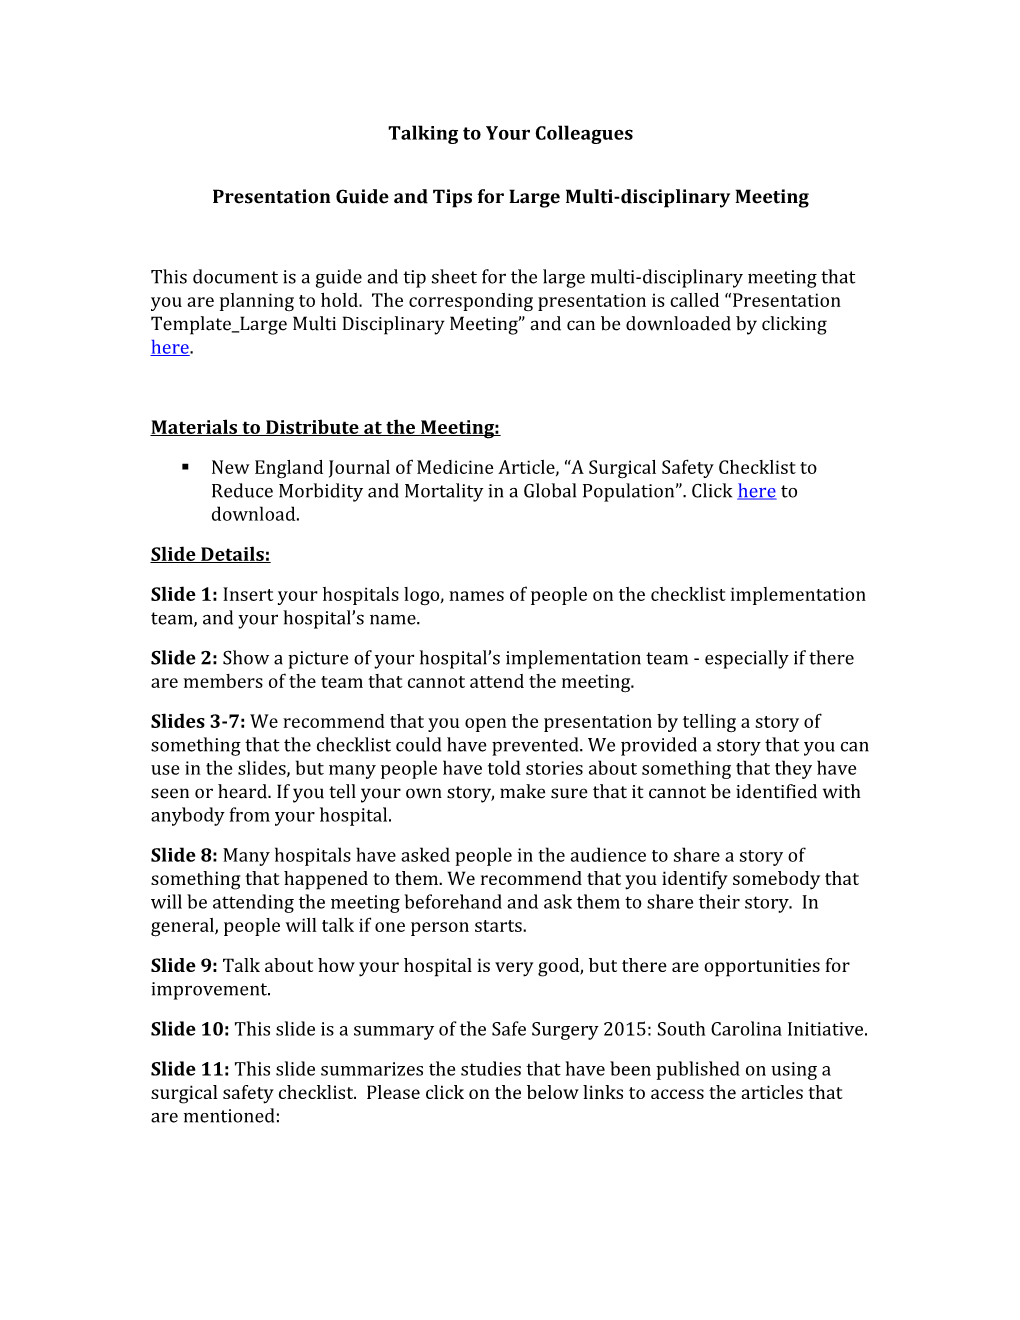 Presentation Guide and Tips for Large Multi-Disciplinary Meeting